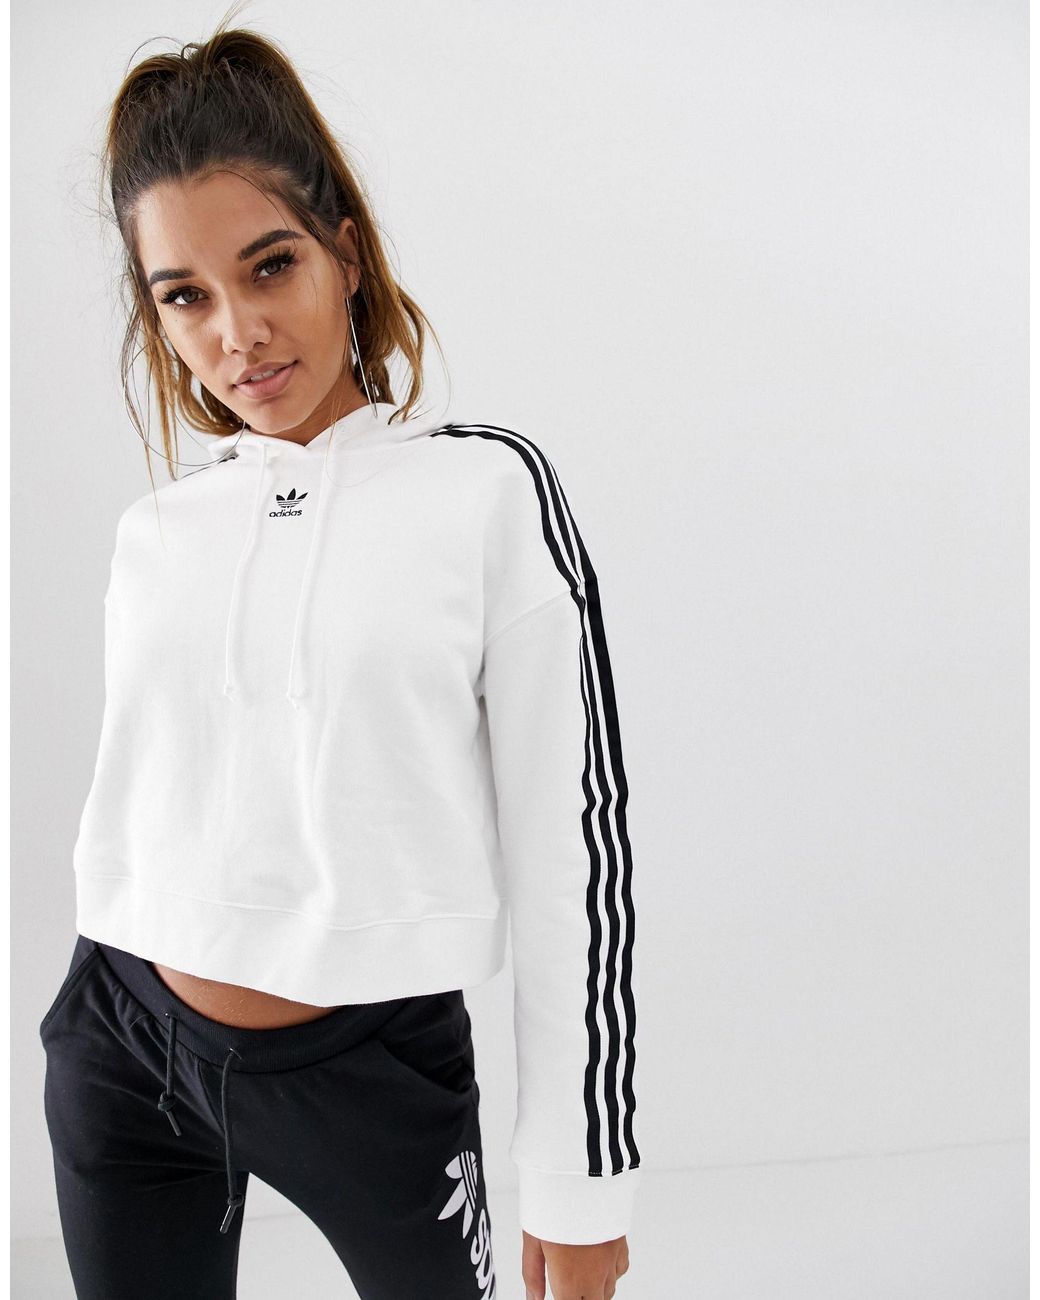 Manga Shinkan Demonio sudadera adidas rayas blancas Limited Special Sales and Special Offers -  Women's & Men's Sneakers & Sports Shoes - Shop Athletic Shoes Online